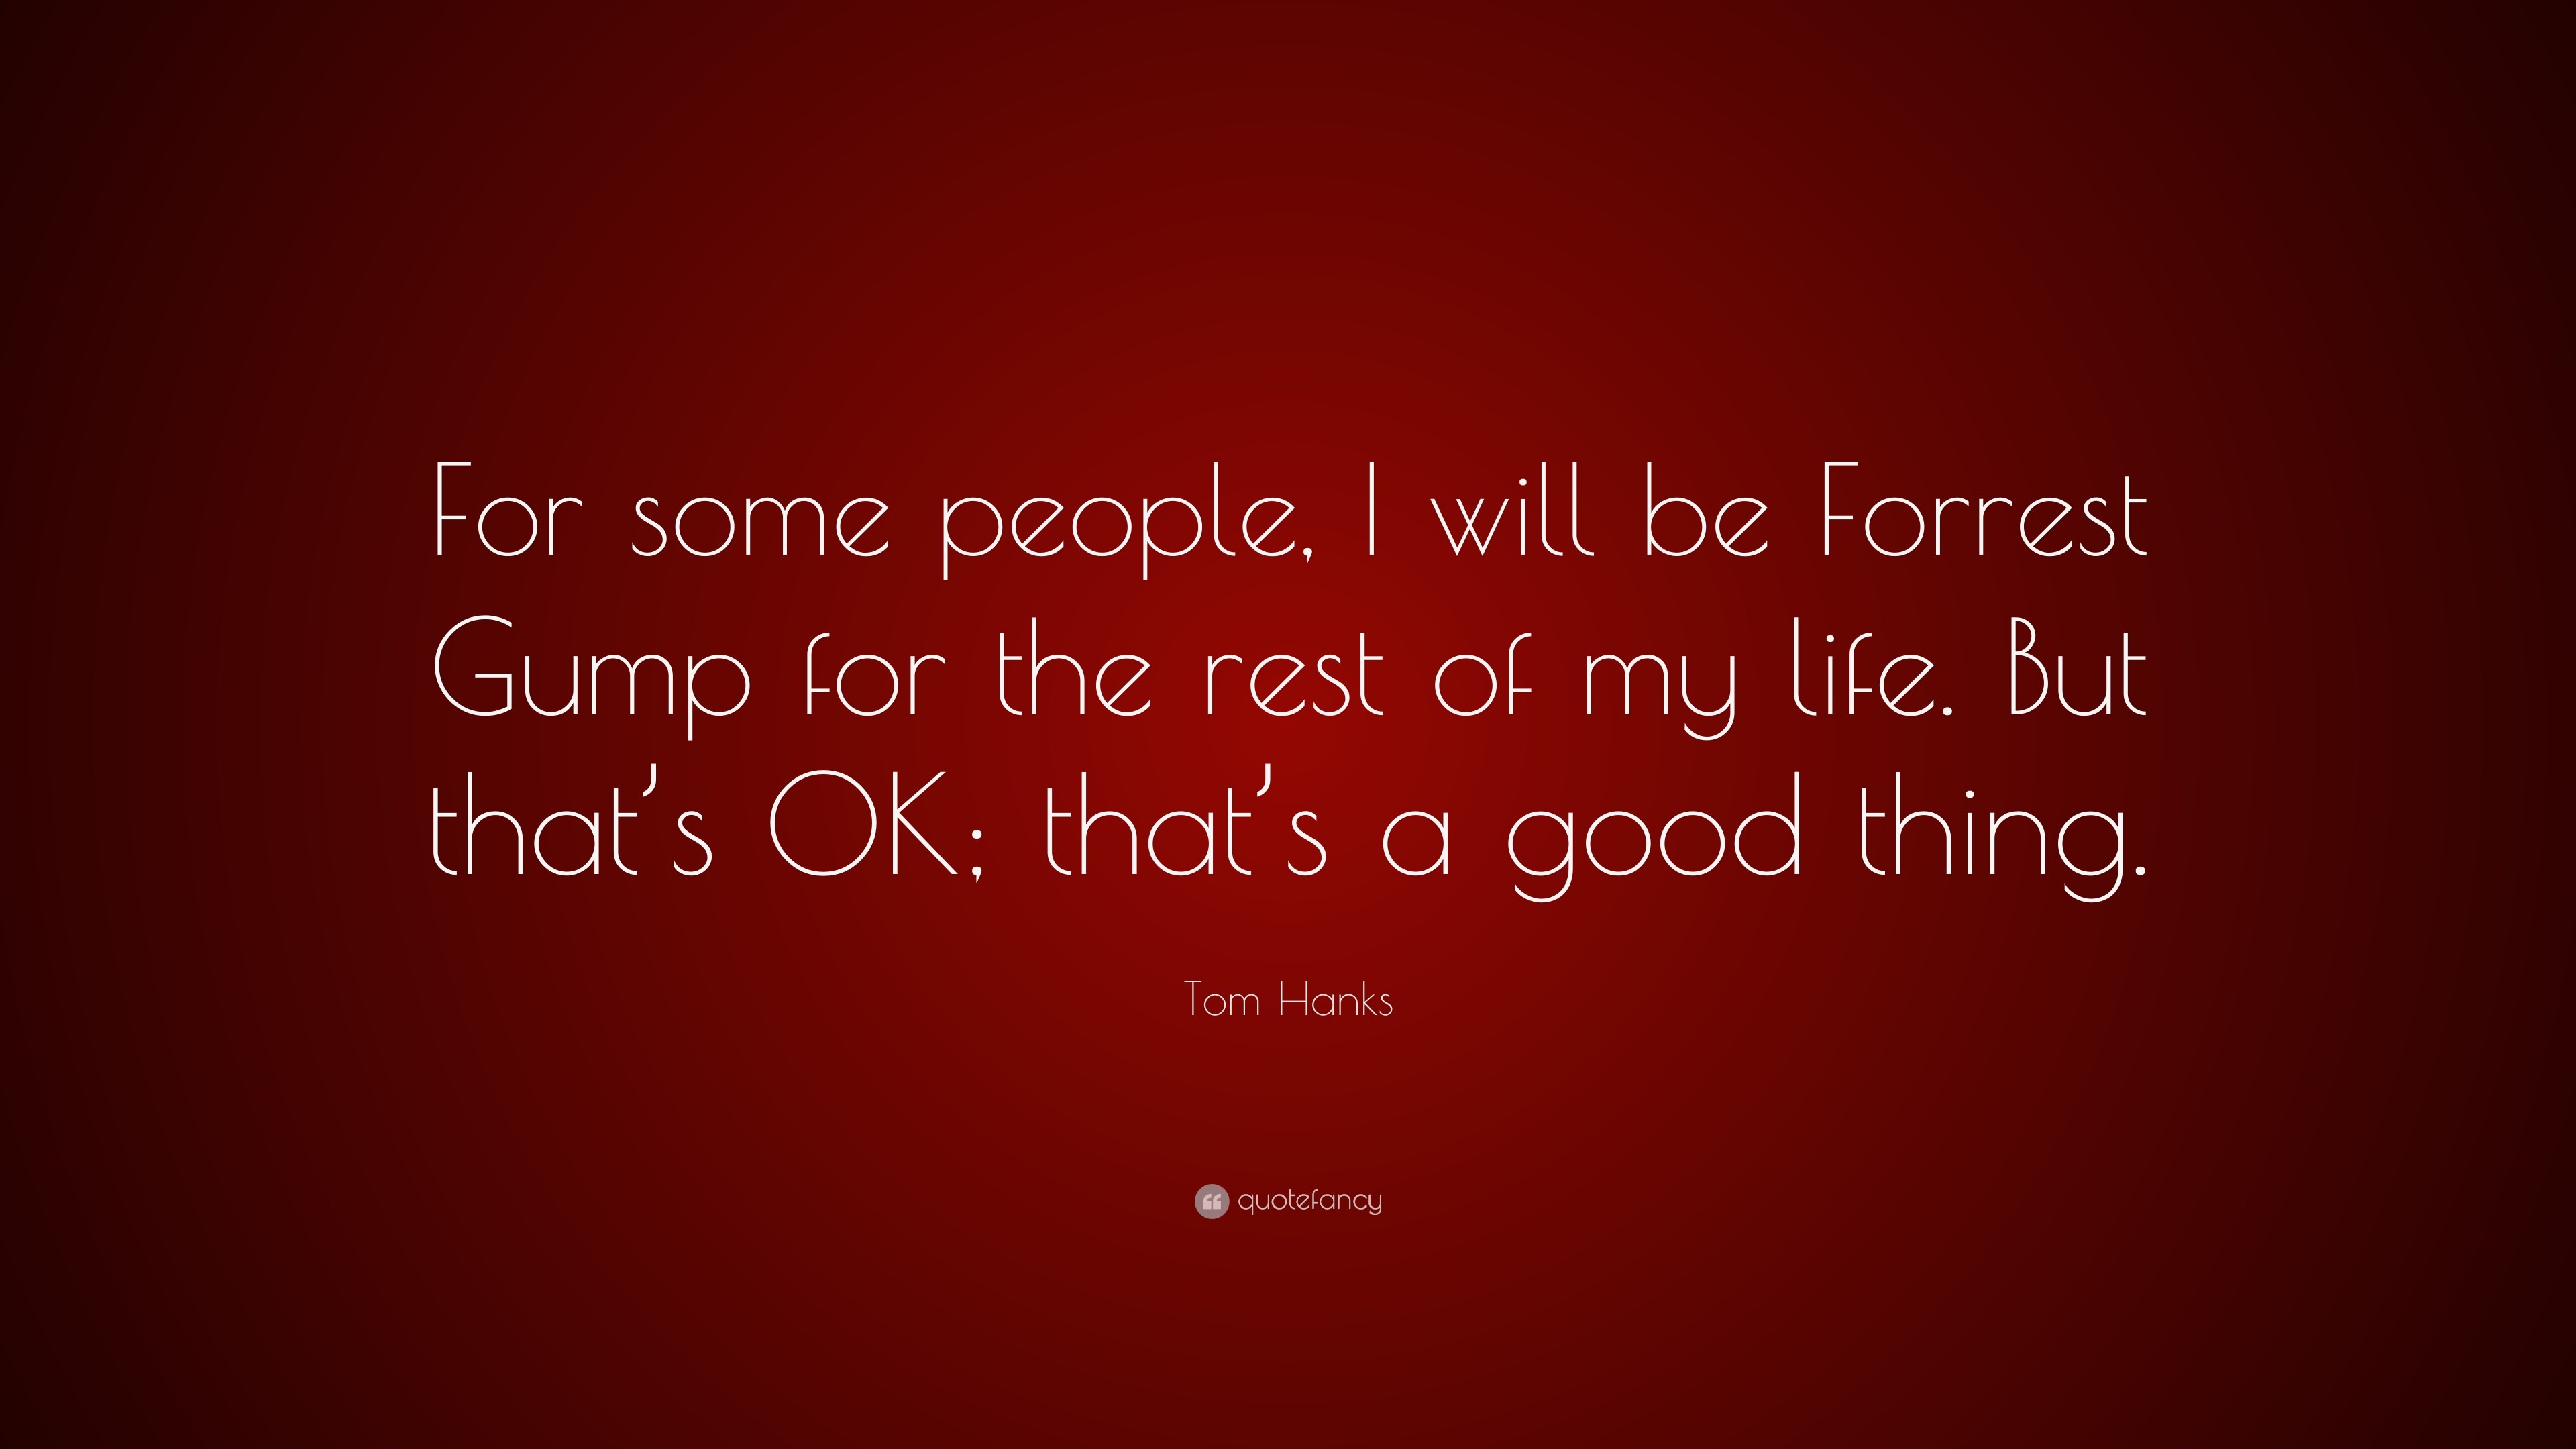 3840x2160 Tom Hanks Quote: “For some people, I will be Forrest Gump for the